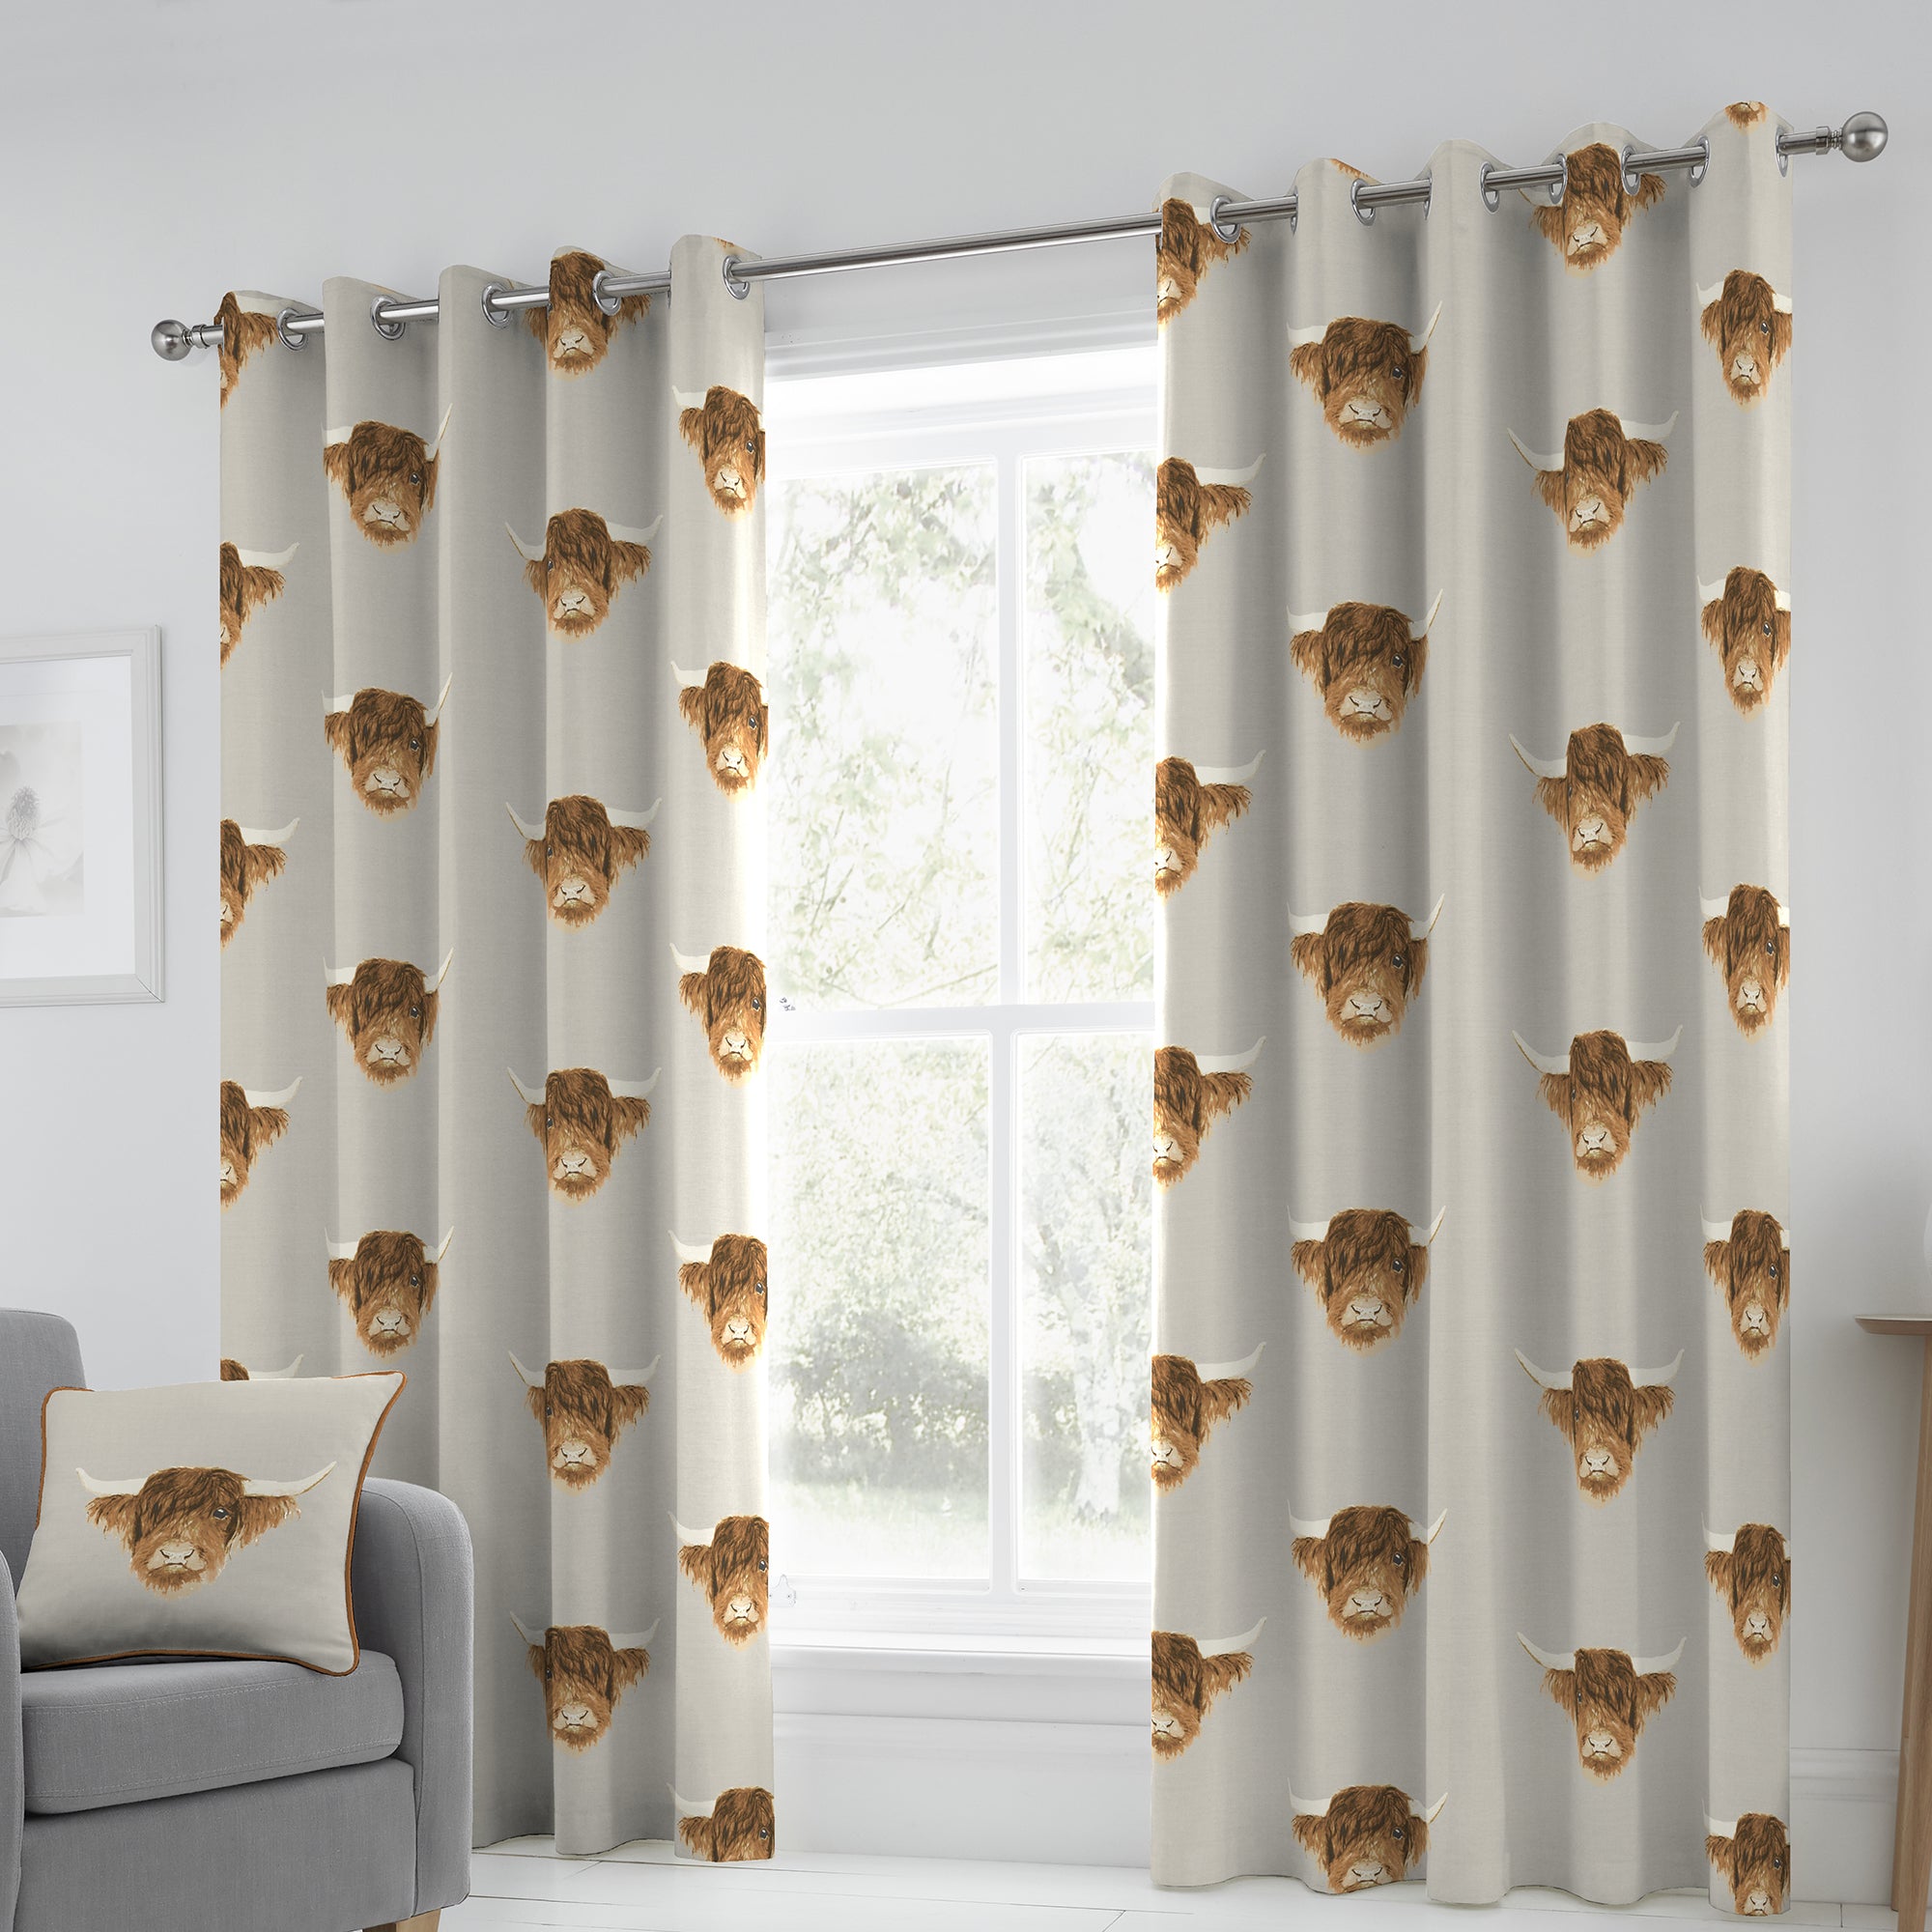 Highland Cow - 100% Cotton Pair of Eyelet Curtains in Natural - by Fusion